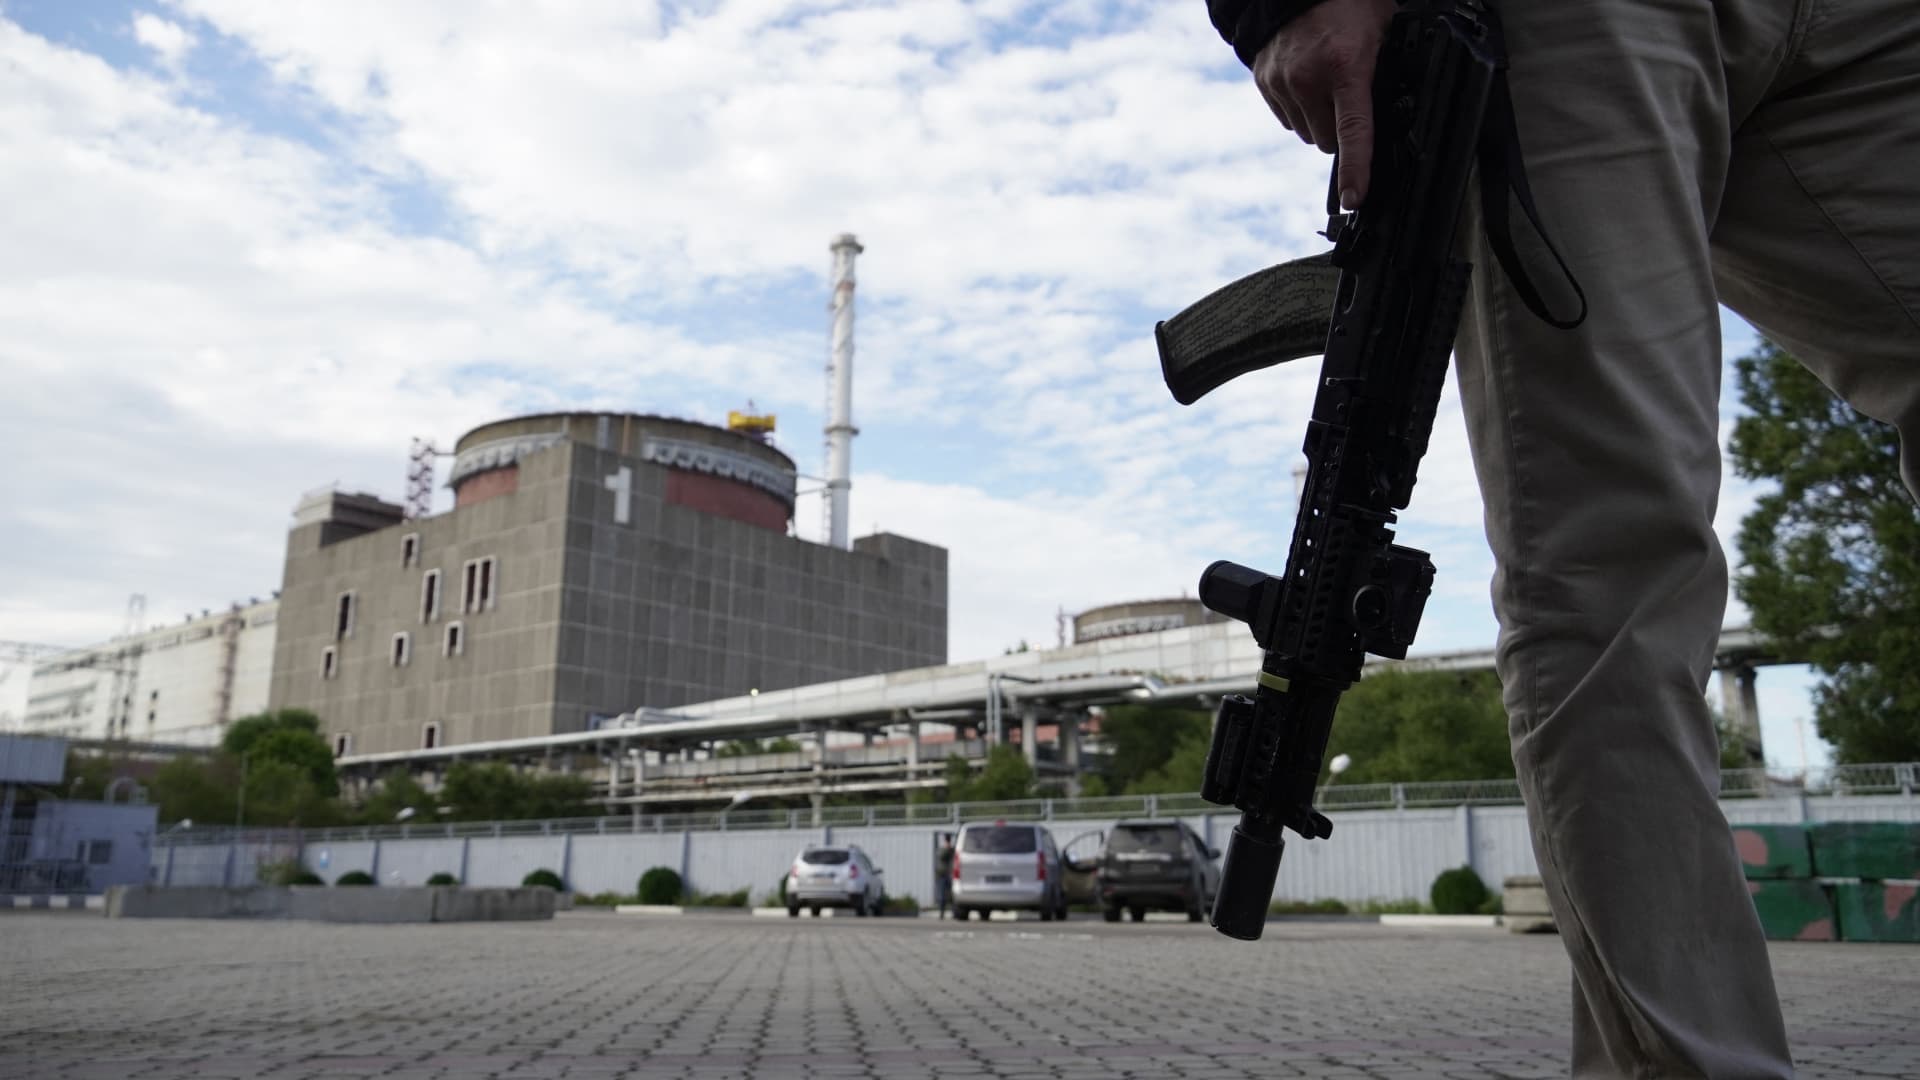 This photo taken on Sept. 11, 2022, shows a security person standing in front of the Zaporizhzhia Nuclear Power Plant in Enerhodar, Zaporizhzhia, amid the Ukraine war.